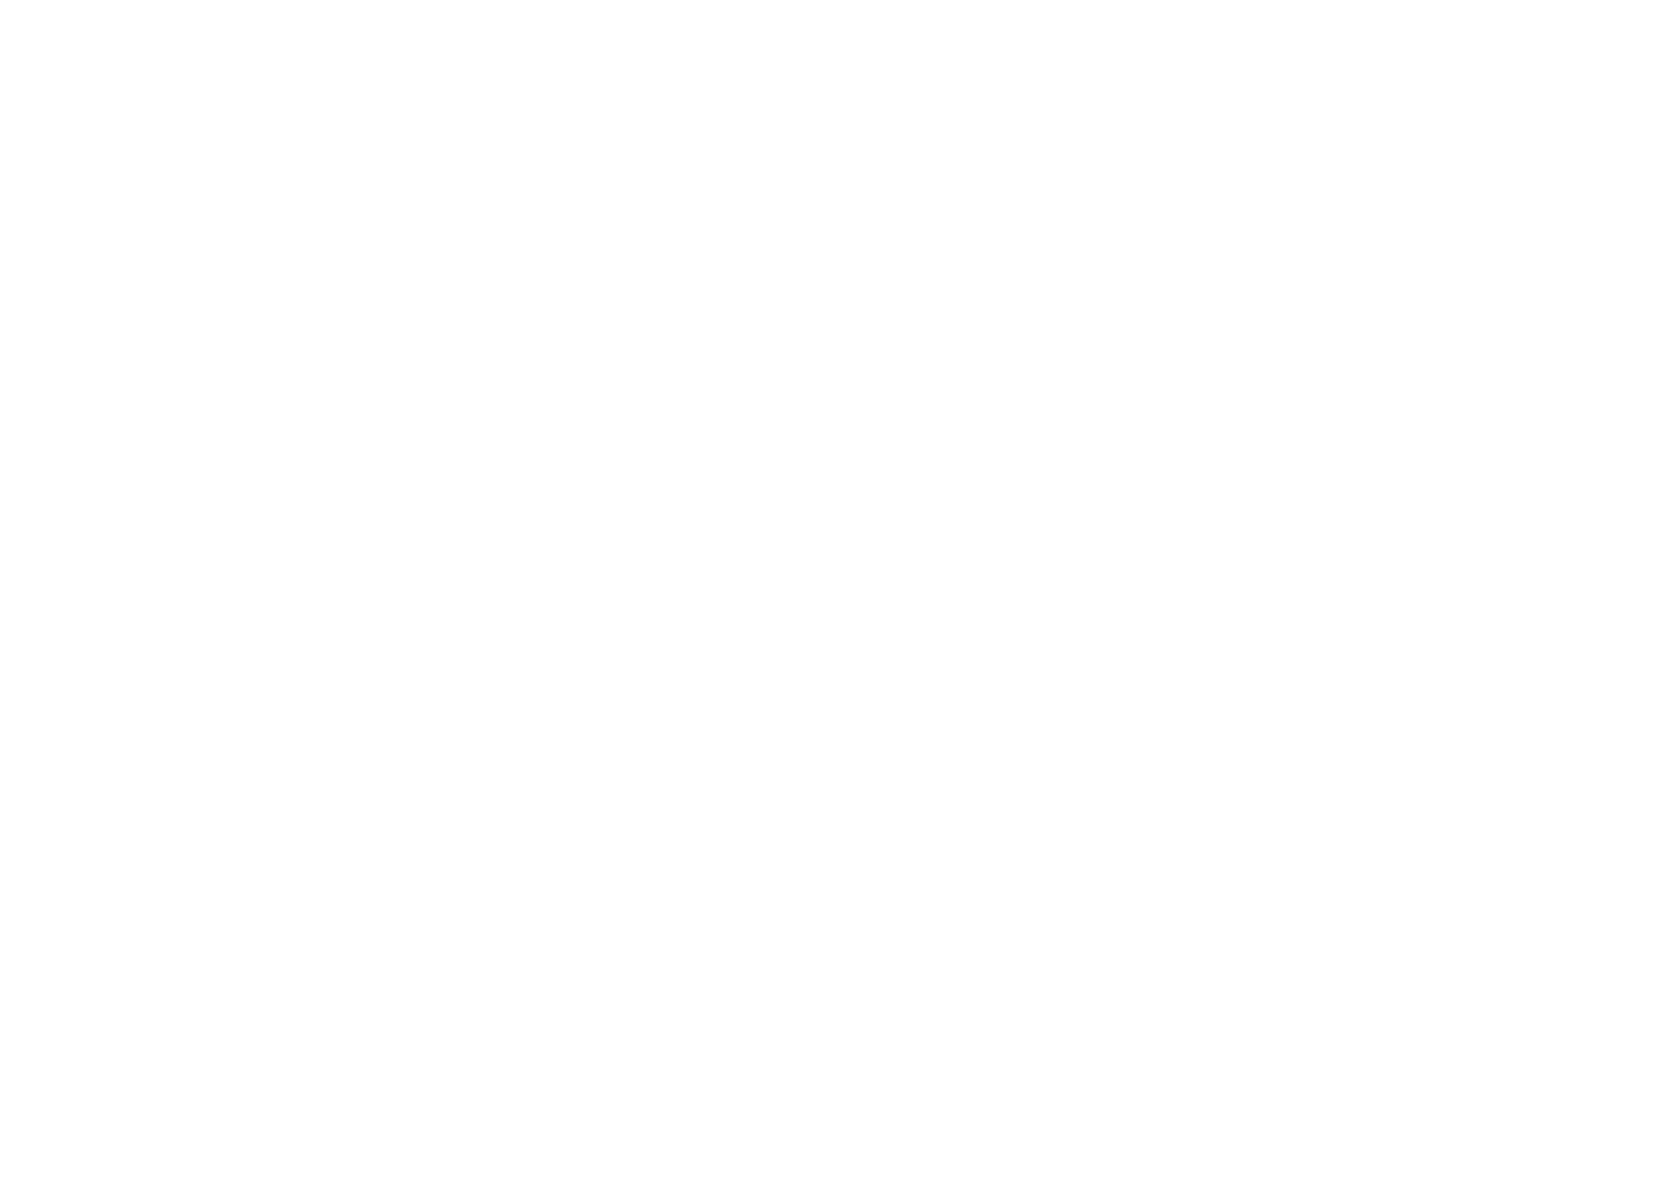 Visions Treatment Centers